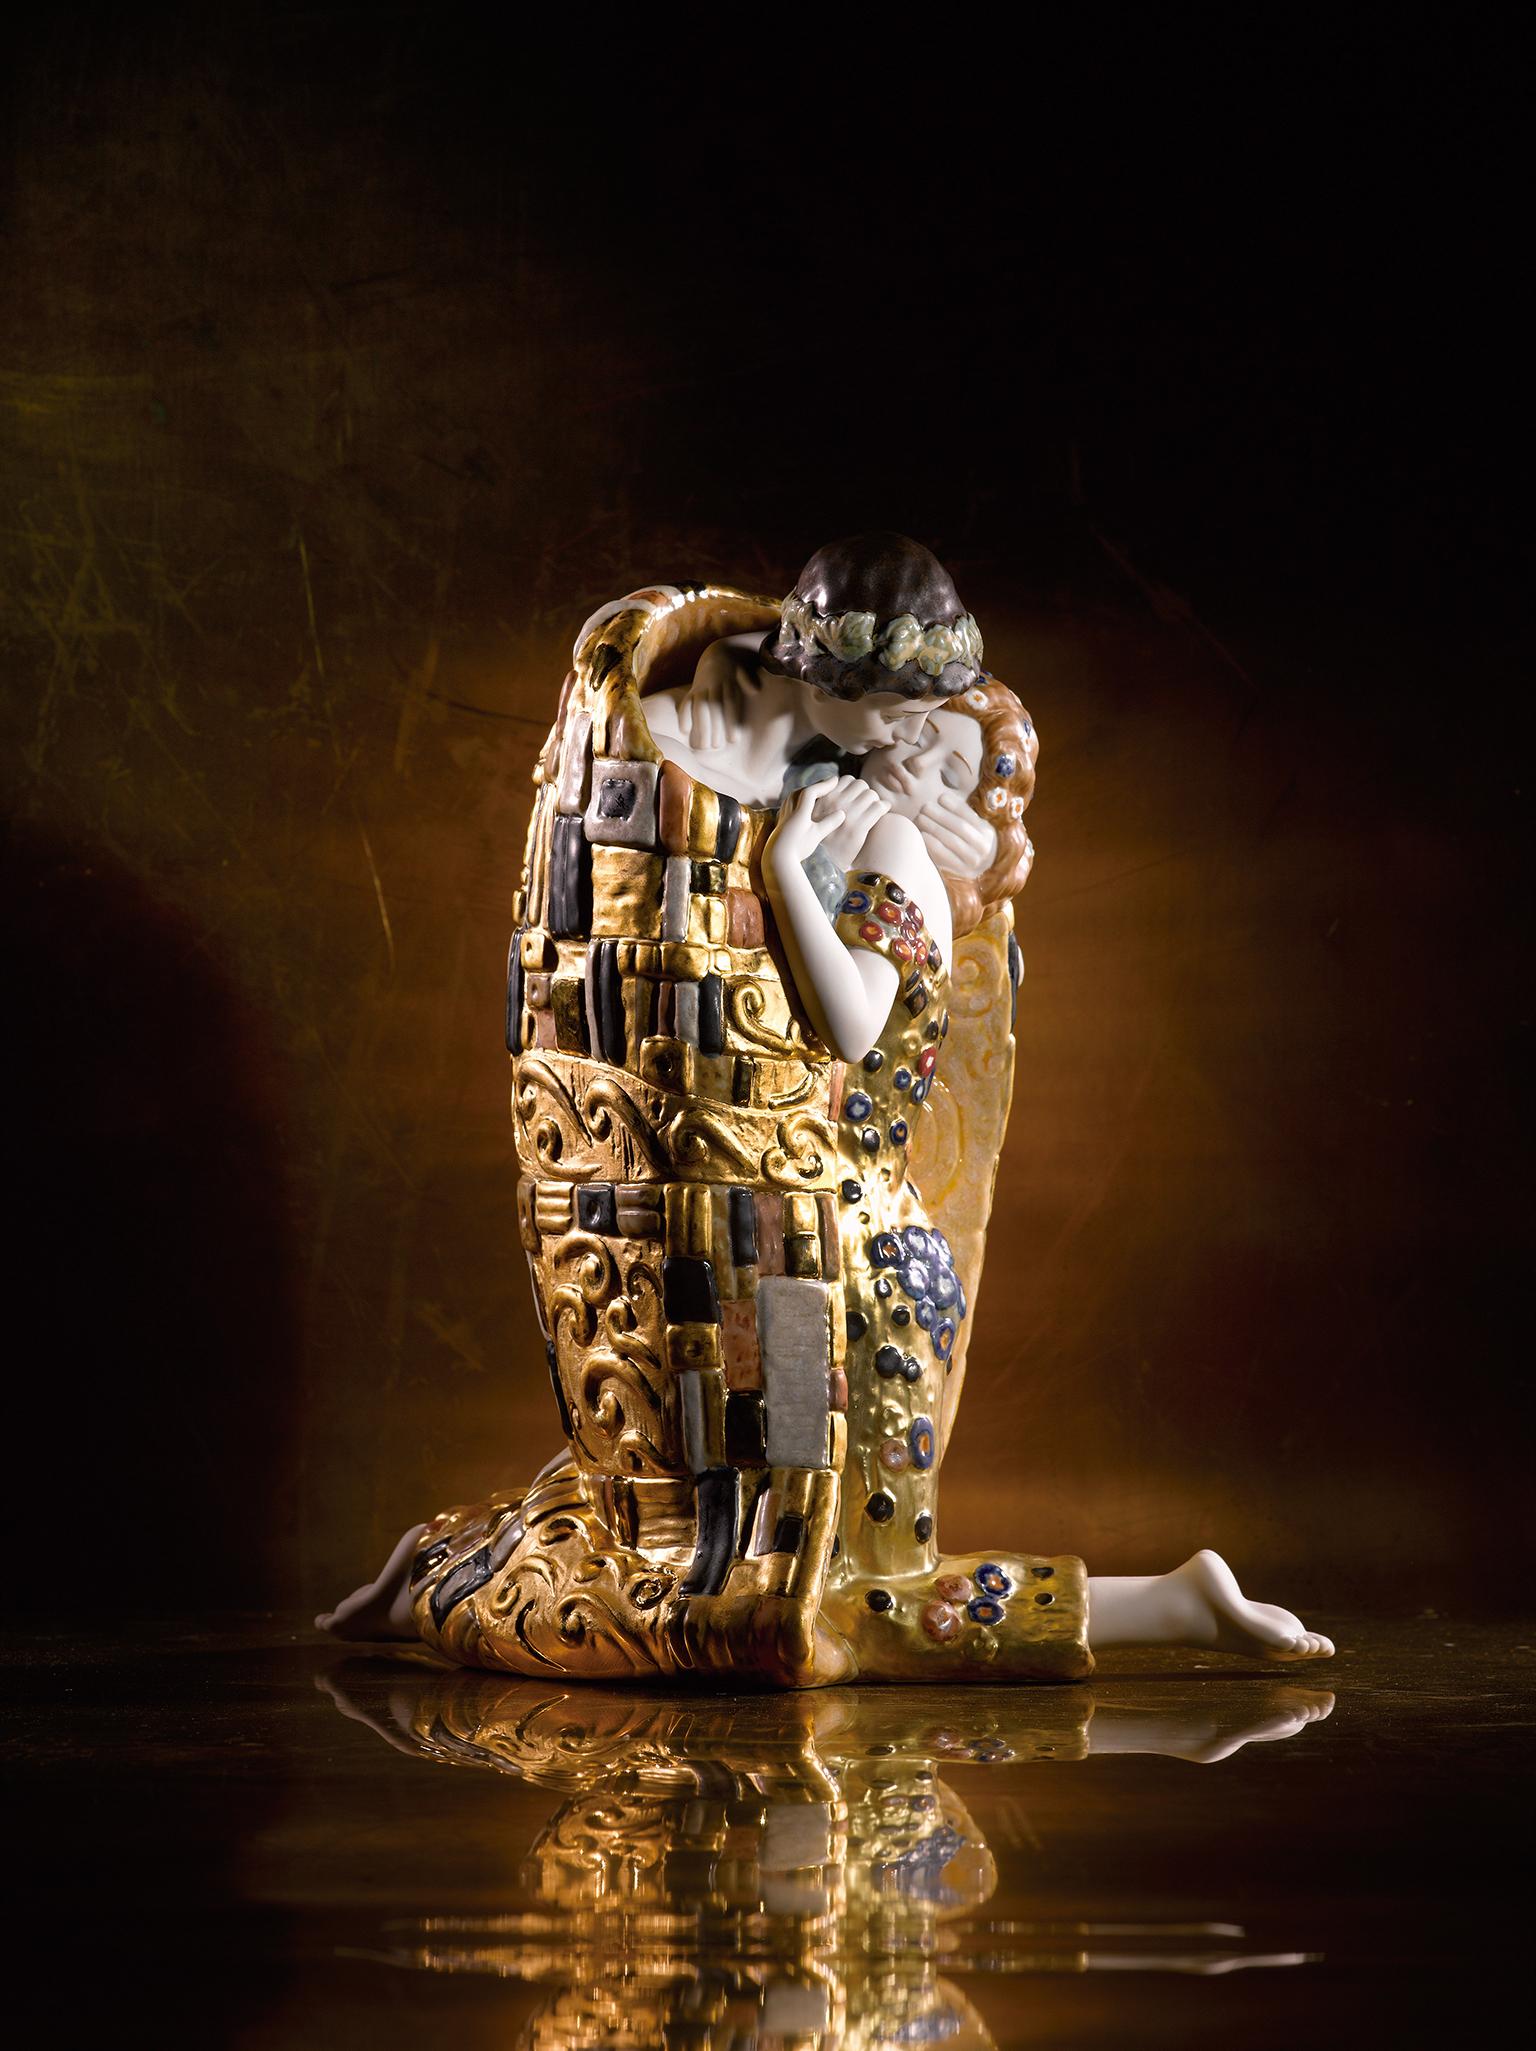 Porcelain sculpture of a representation of the work of the painter Gustav Klimt with great decoration with different types of gilded luster. This piece, inspired by the most famous work of the Viennese painter, was made to mark the 150th anniversary